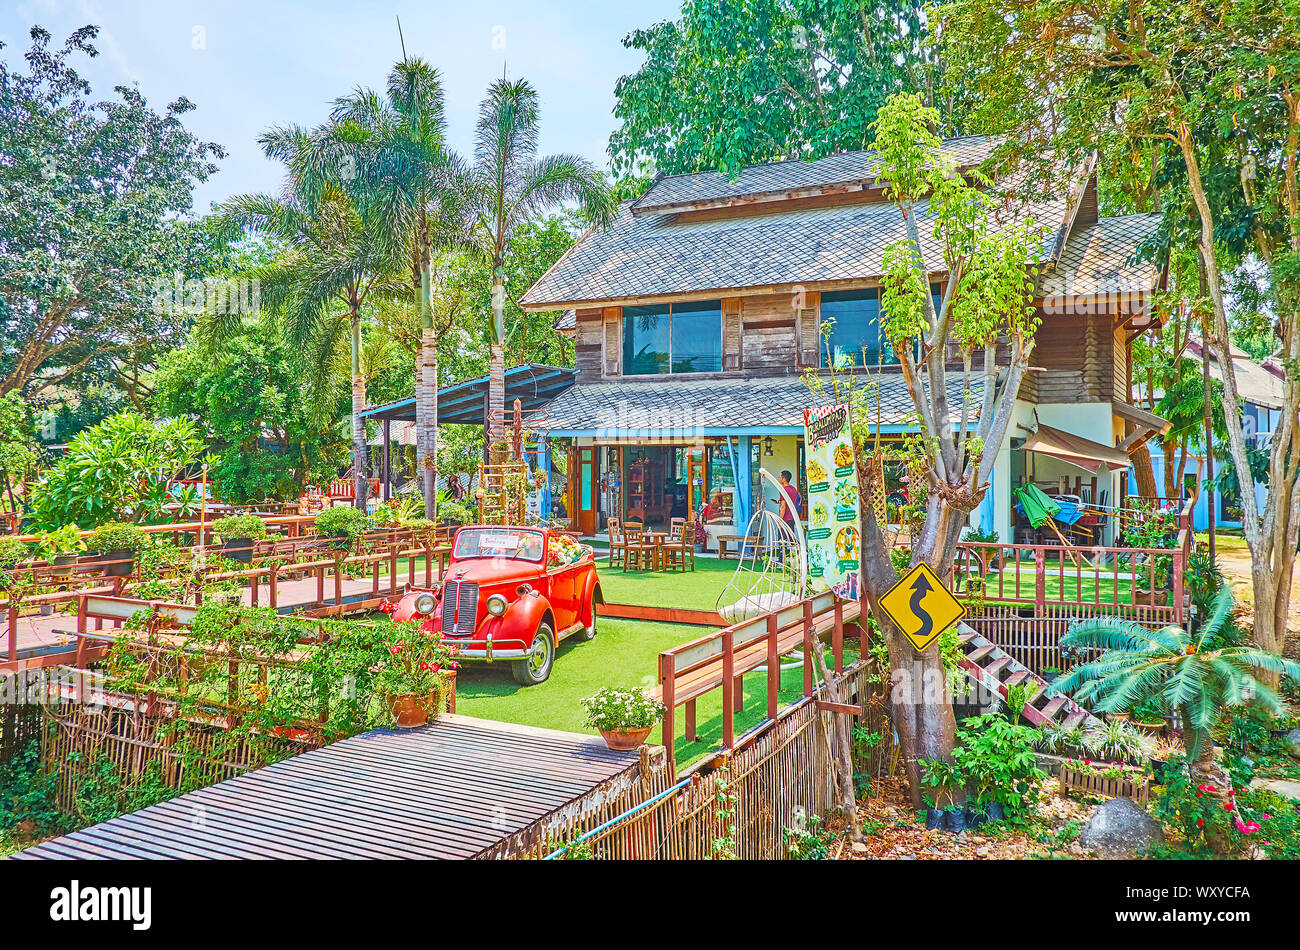 PAI, THAILAND - MAY 5, 2019: The countryside hotel-restaurant, surrounded by lush tropical carden and located in Pai suburb, next to Memorial bridge, Stock Photo